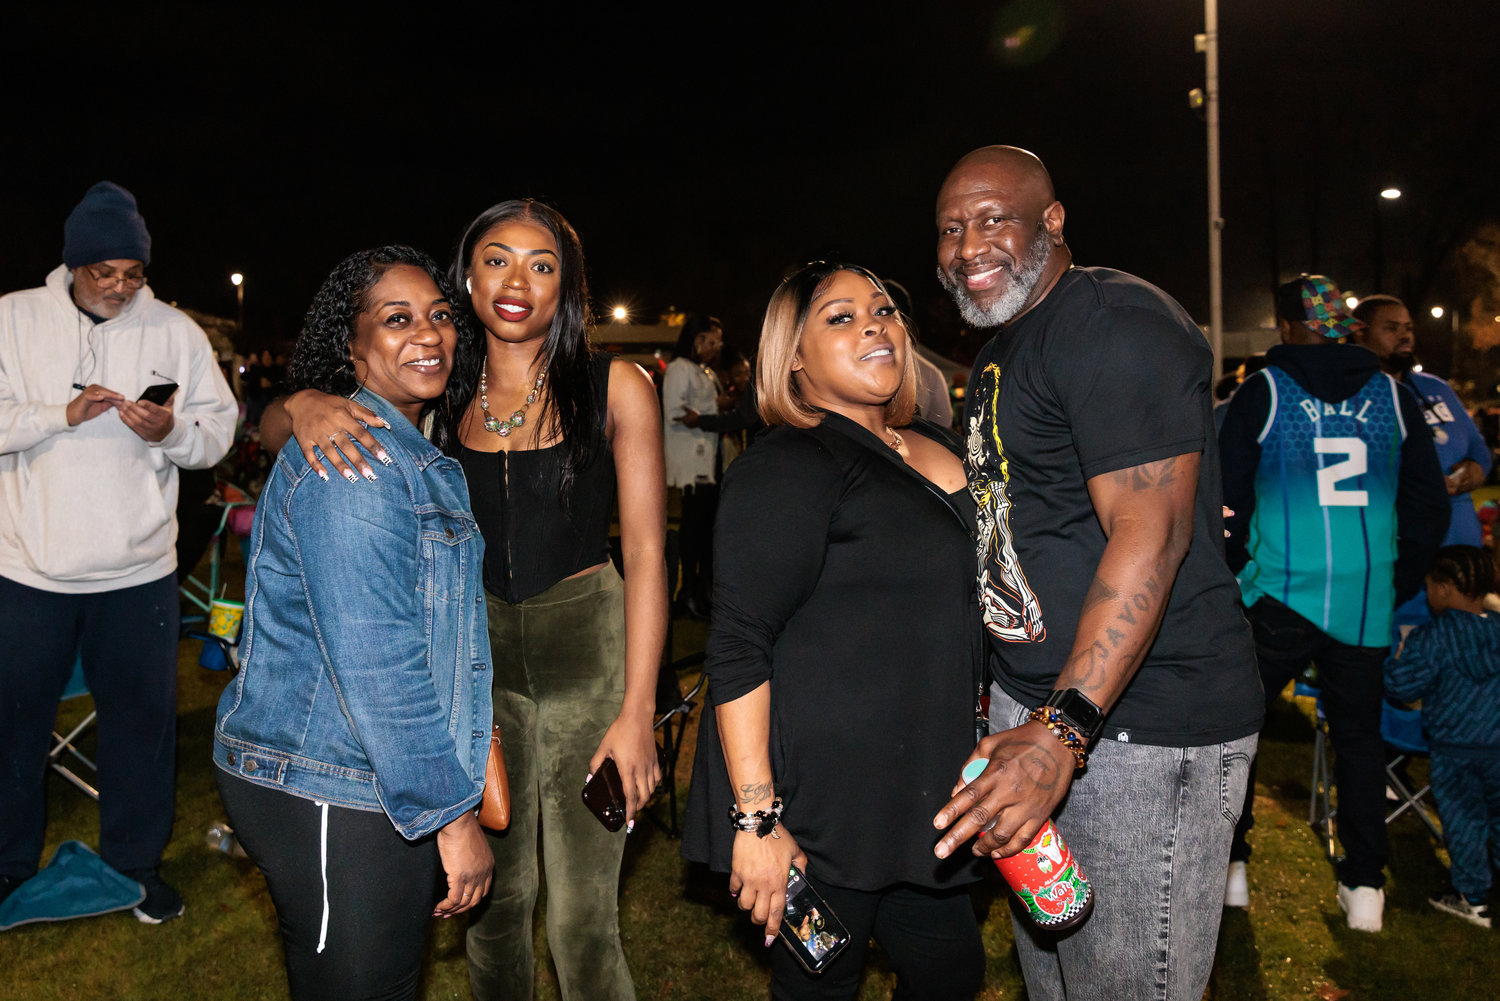 Taishemi Bougal, Taijai Prosser, Latoya McPherson, Derick Morrison celebrate the end of 2022 during the Cool Spring District's “Night Circus: A District New Year’s Eve Spectacular” in Festival Park.  R&B group Tony! Toni! Toné, and various circus acts performed into the New Year on Dec. 31, 2022.